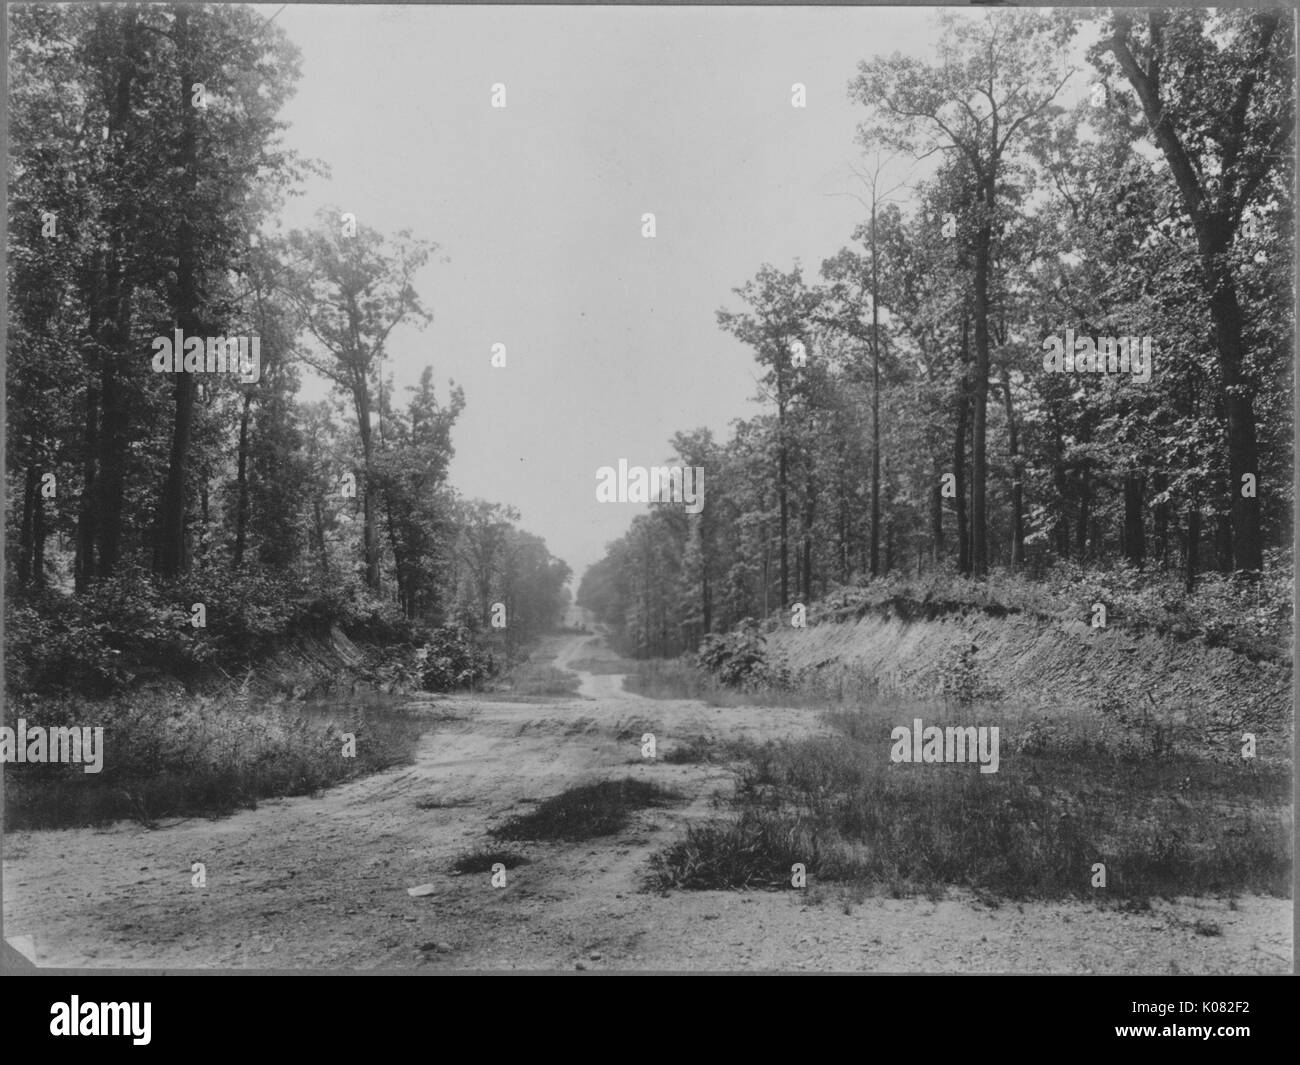 Path of dirt covered in wild vegetation and trees, trees on slightly leveled surface, Baltimore, Maryland, 1910. This image is from a series documenting the construction and sale of homes in the Roland Park/Guilford neighborhood of Baltimore, a streetcar suburb and one of the first planned communities in the United States. Stock Photo